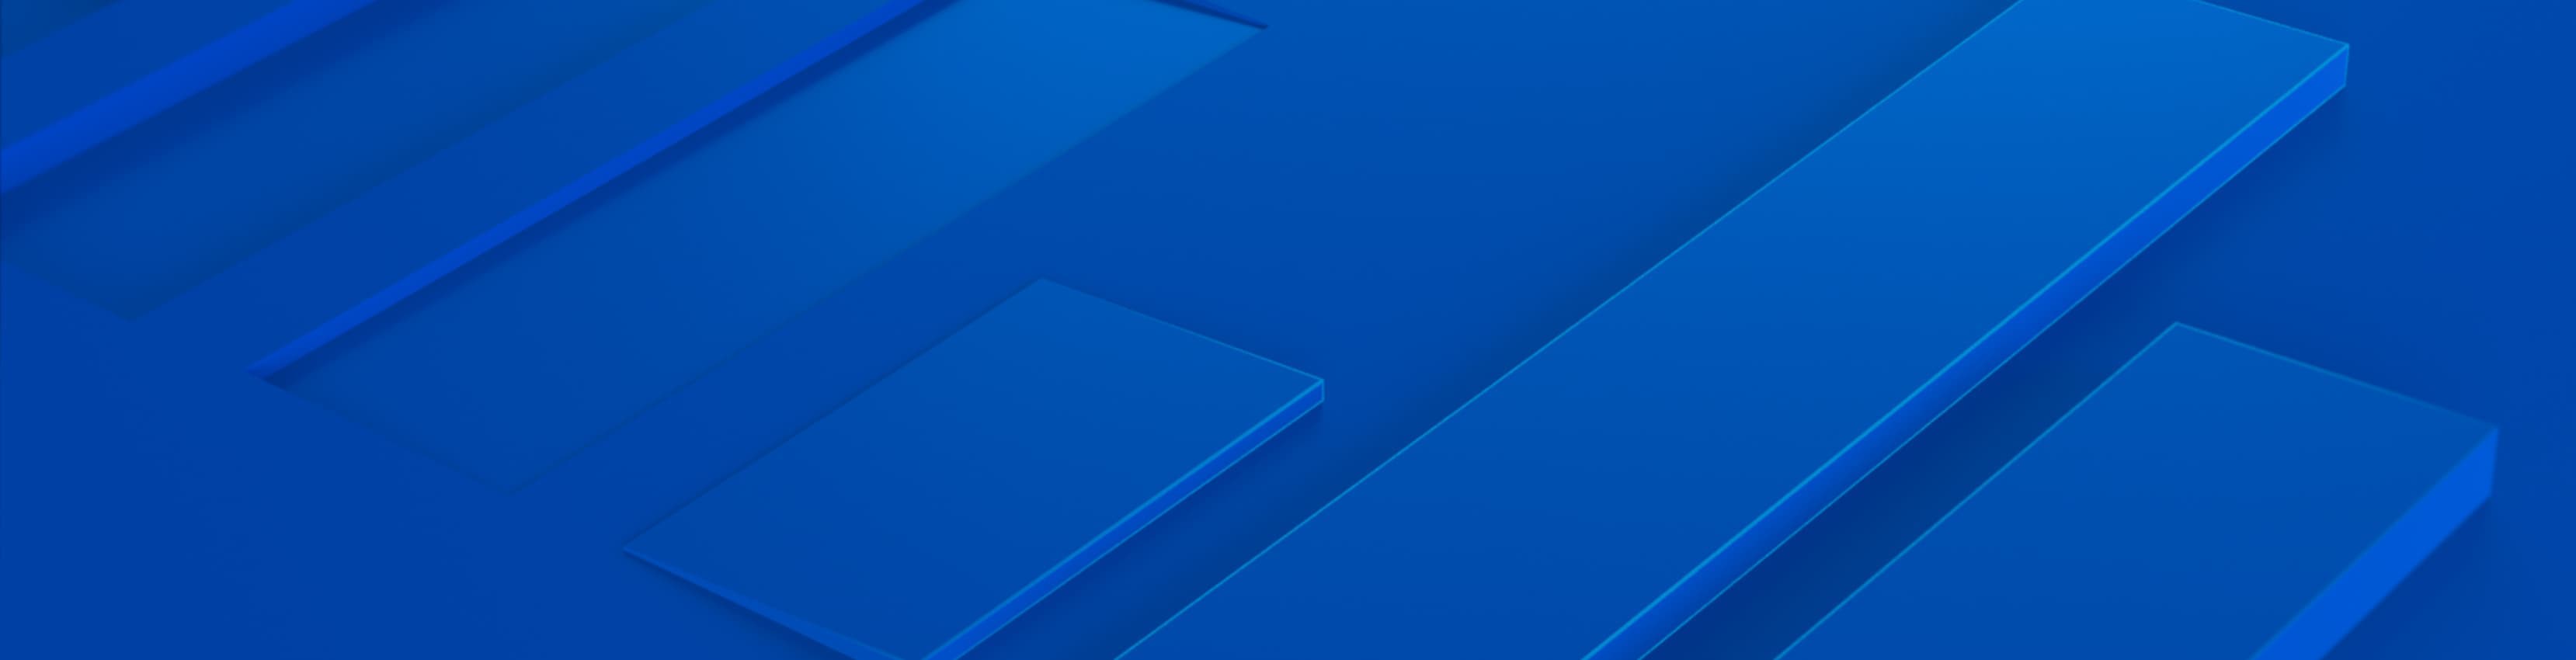 Placeholder image of blue bar charts embossed on a royal blue background